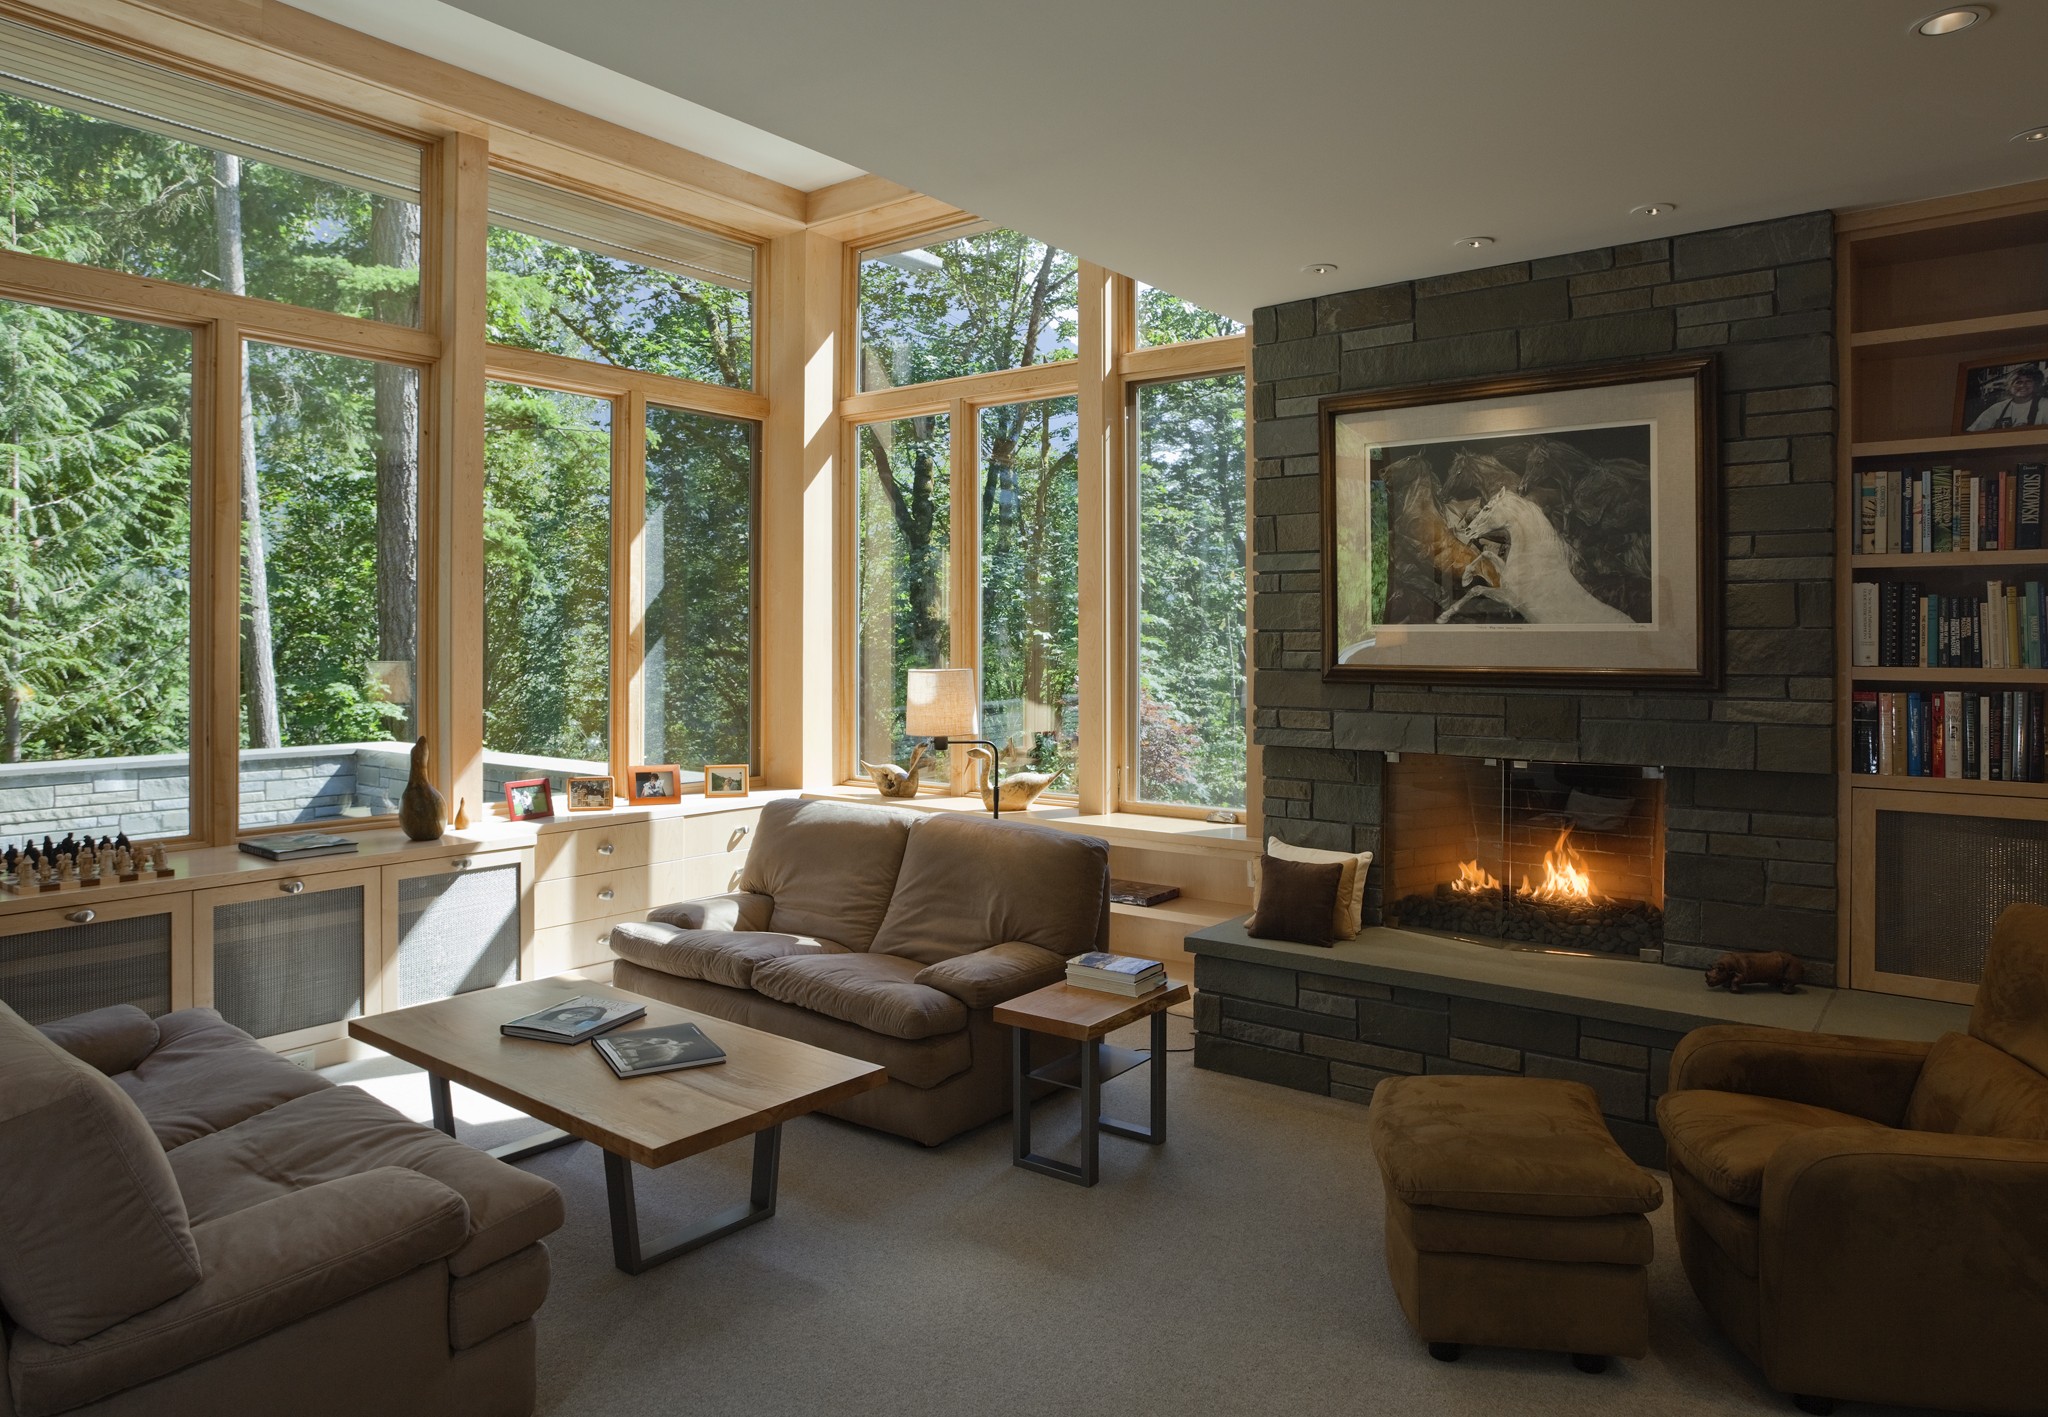 7 Ways To Arrange A Living Room With A Fireplace